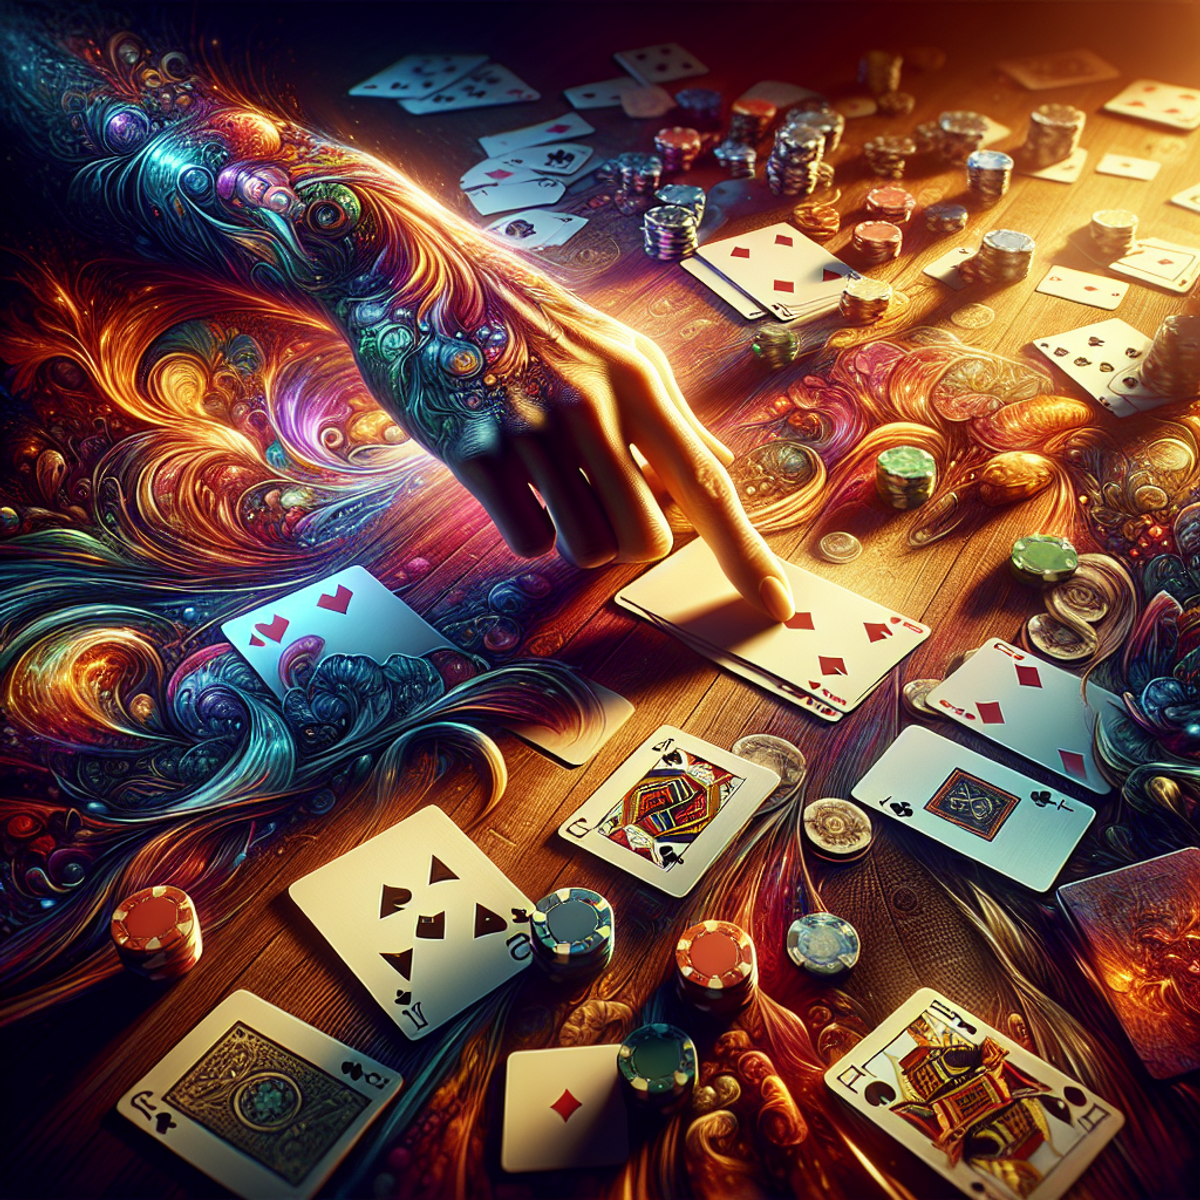 A human hand hovers over a deck of playing cards spread out on a table, fingers poised to pick a card. The scene is rich in color and intensity, captu